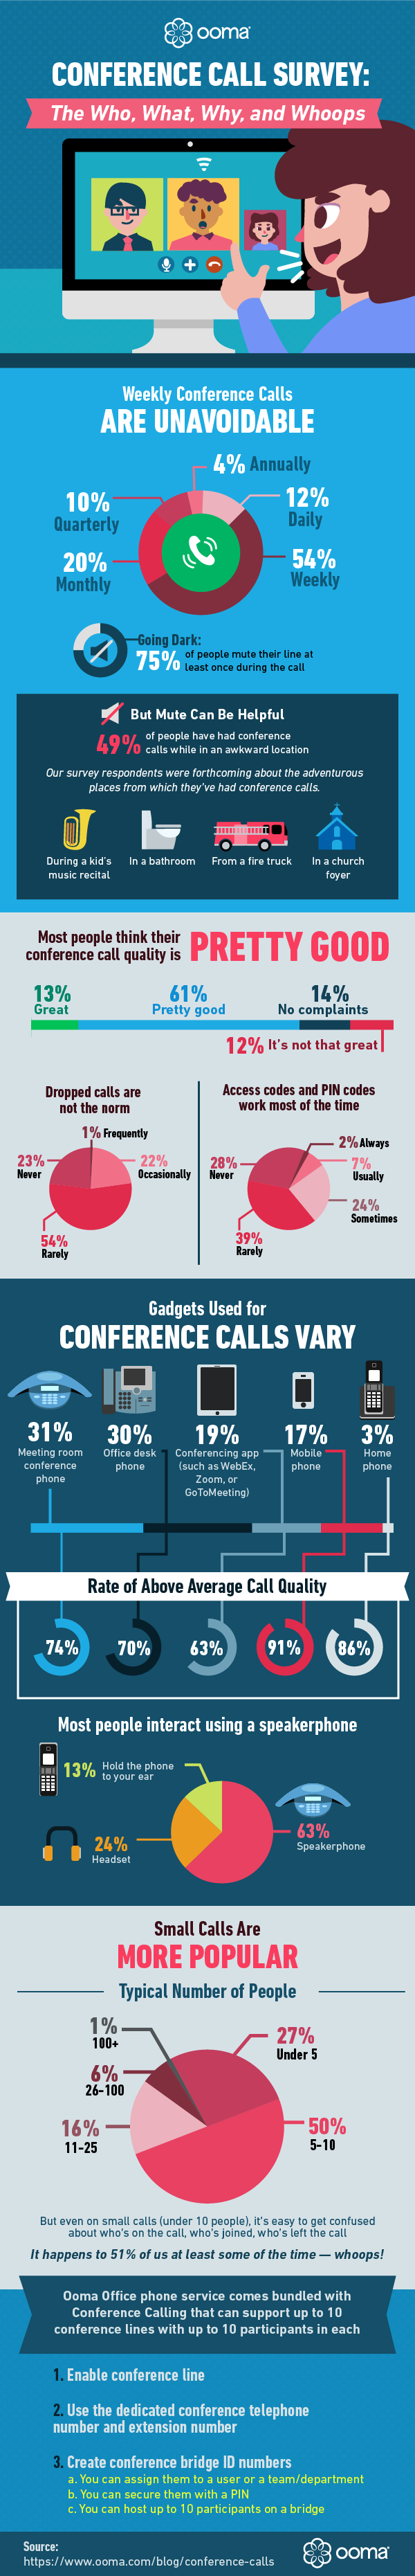 Conference Call Survey: The Who, What, Why, and Whoops